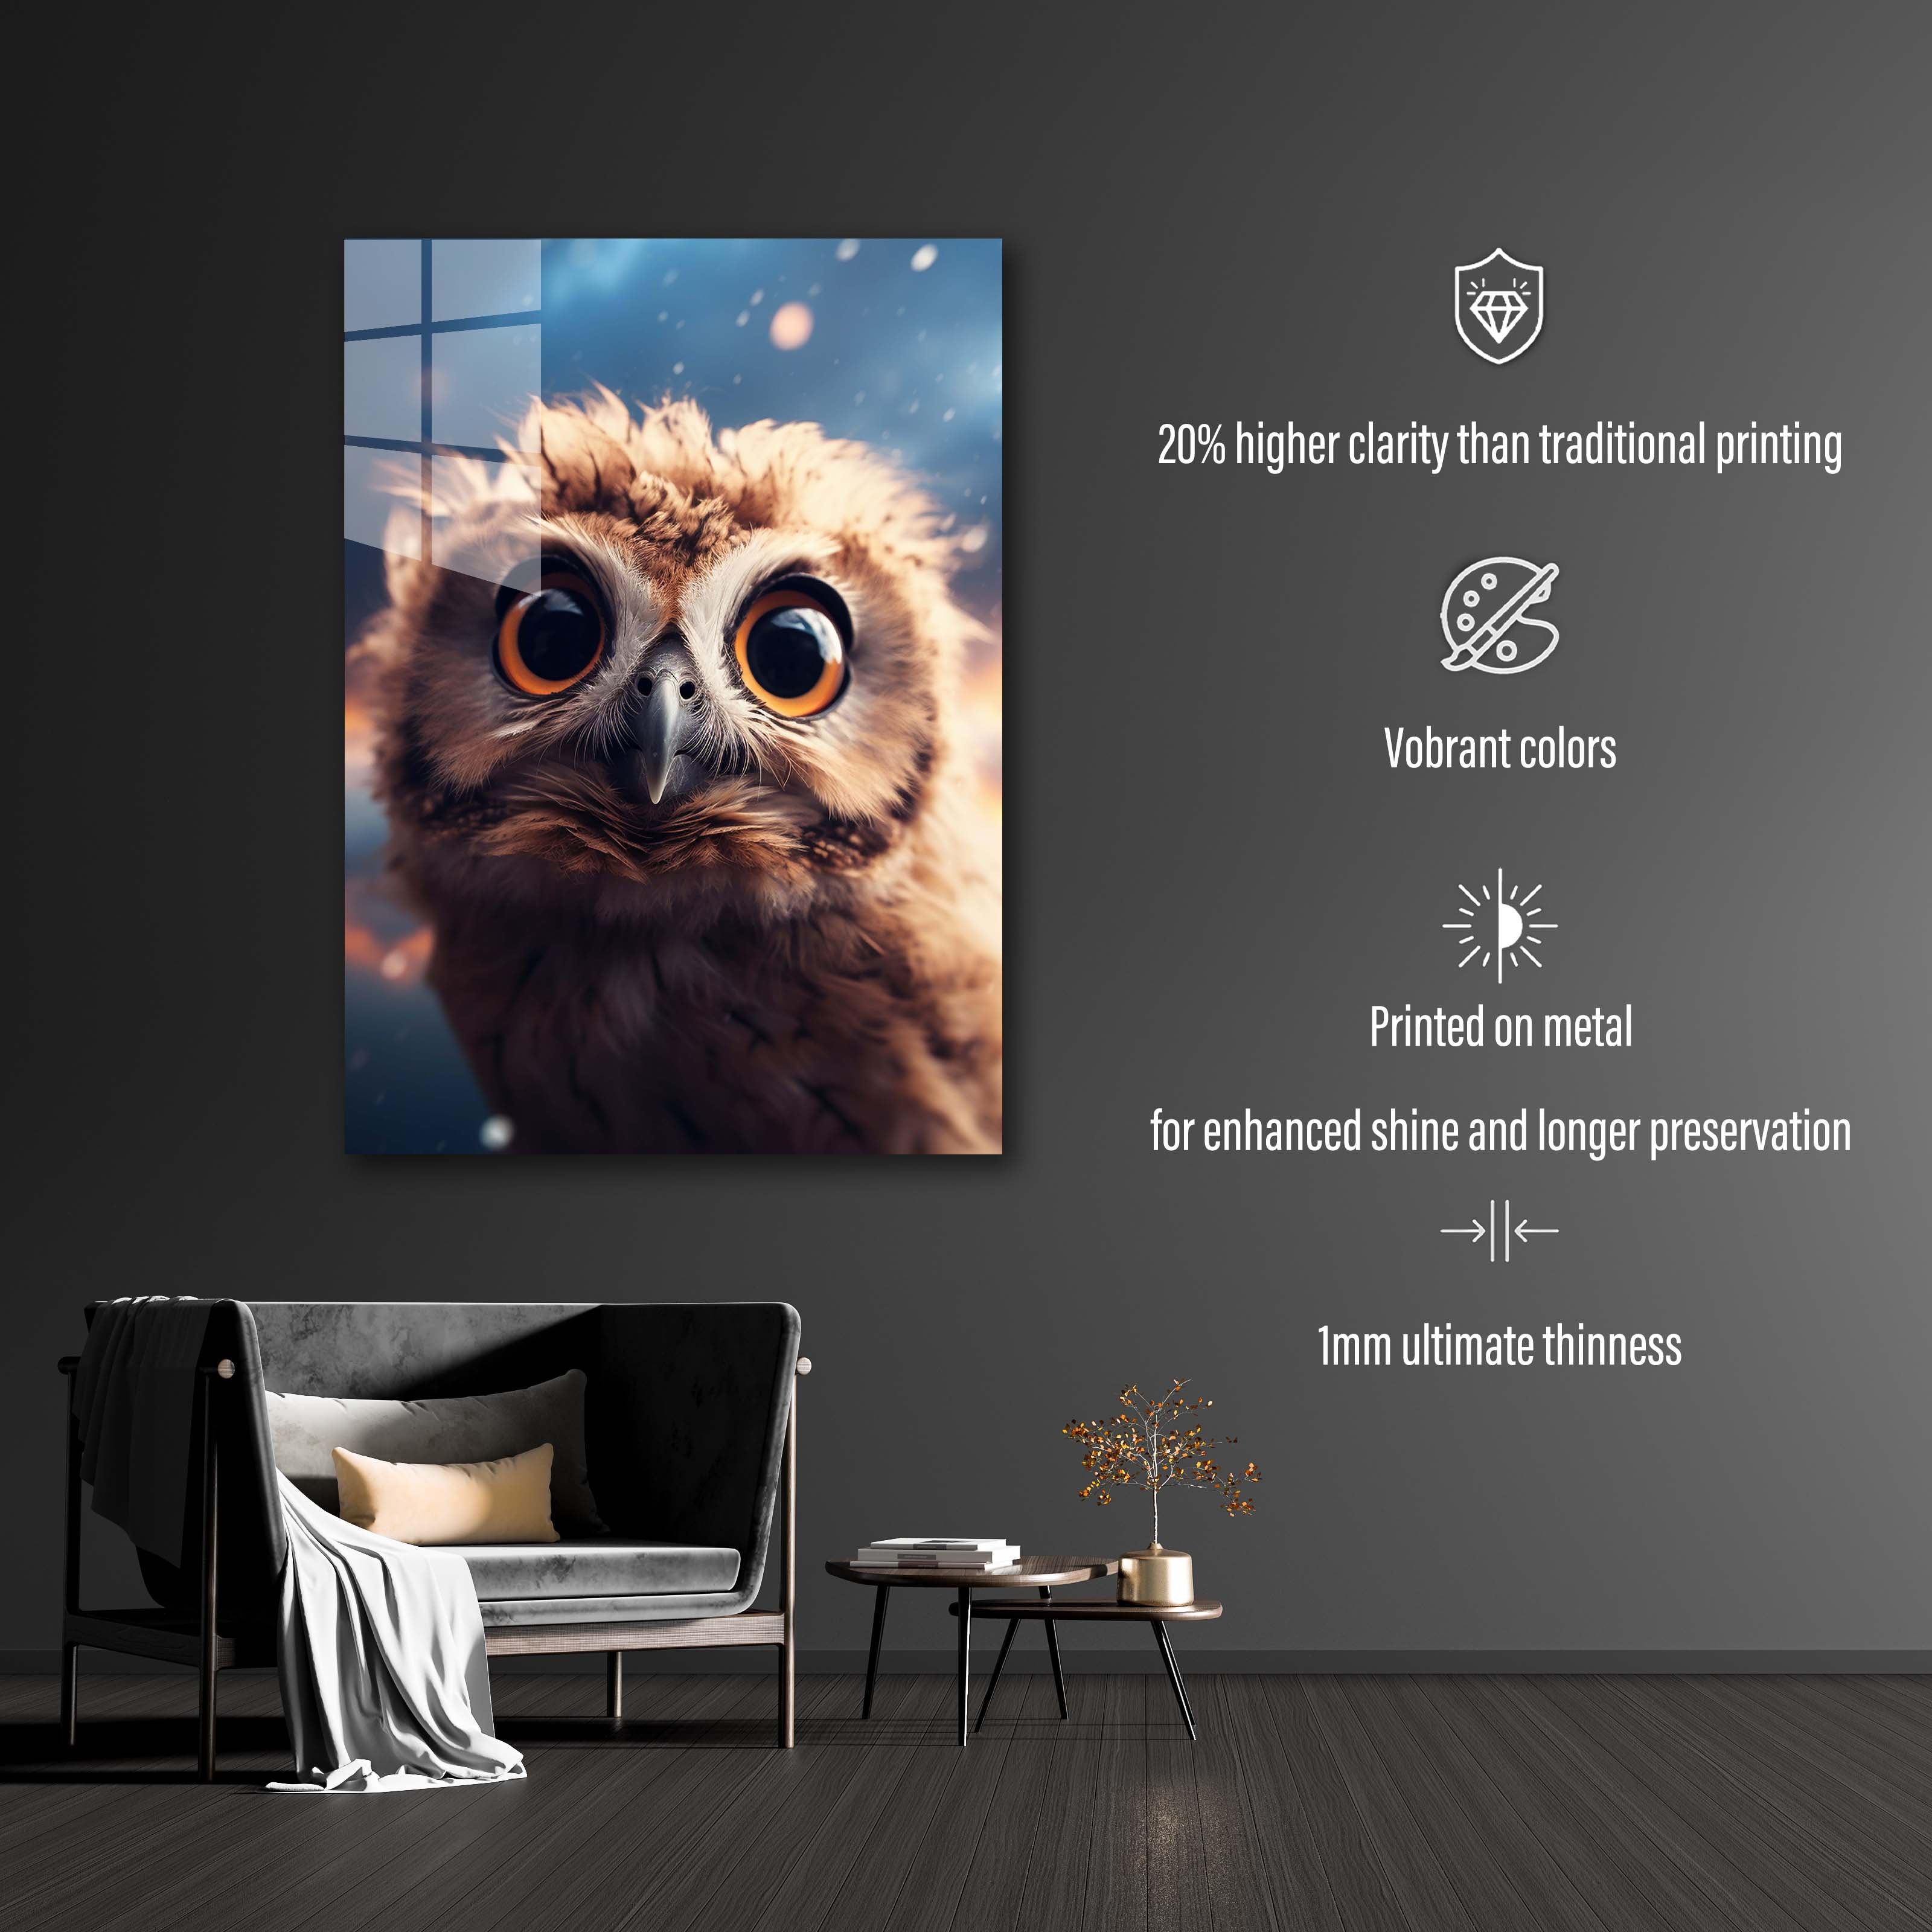 Cute Baby Owl-designed by @Mbaka.ai